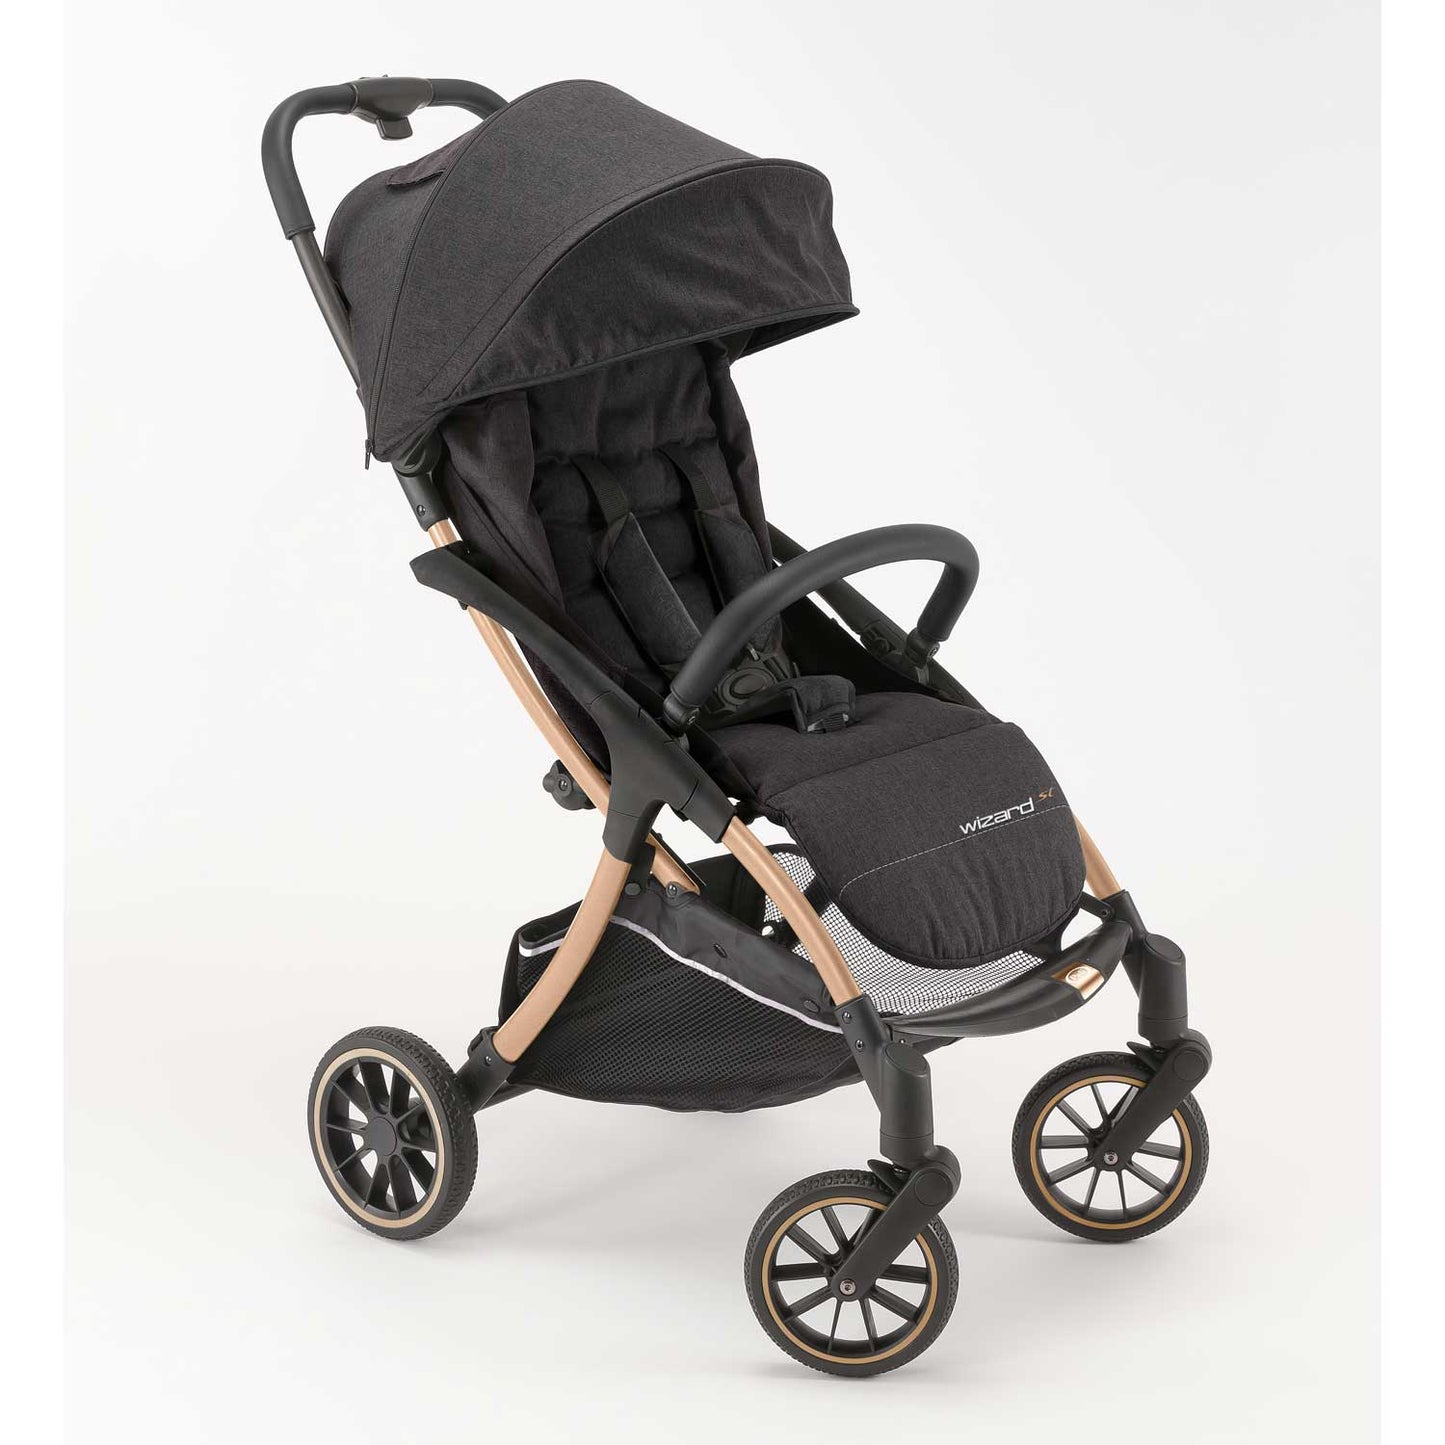 Pali - Wizard compact stroller